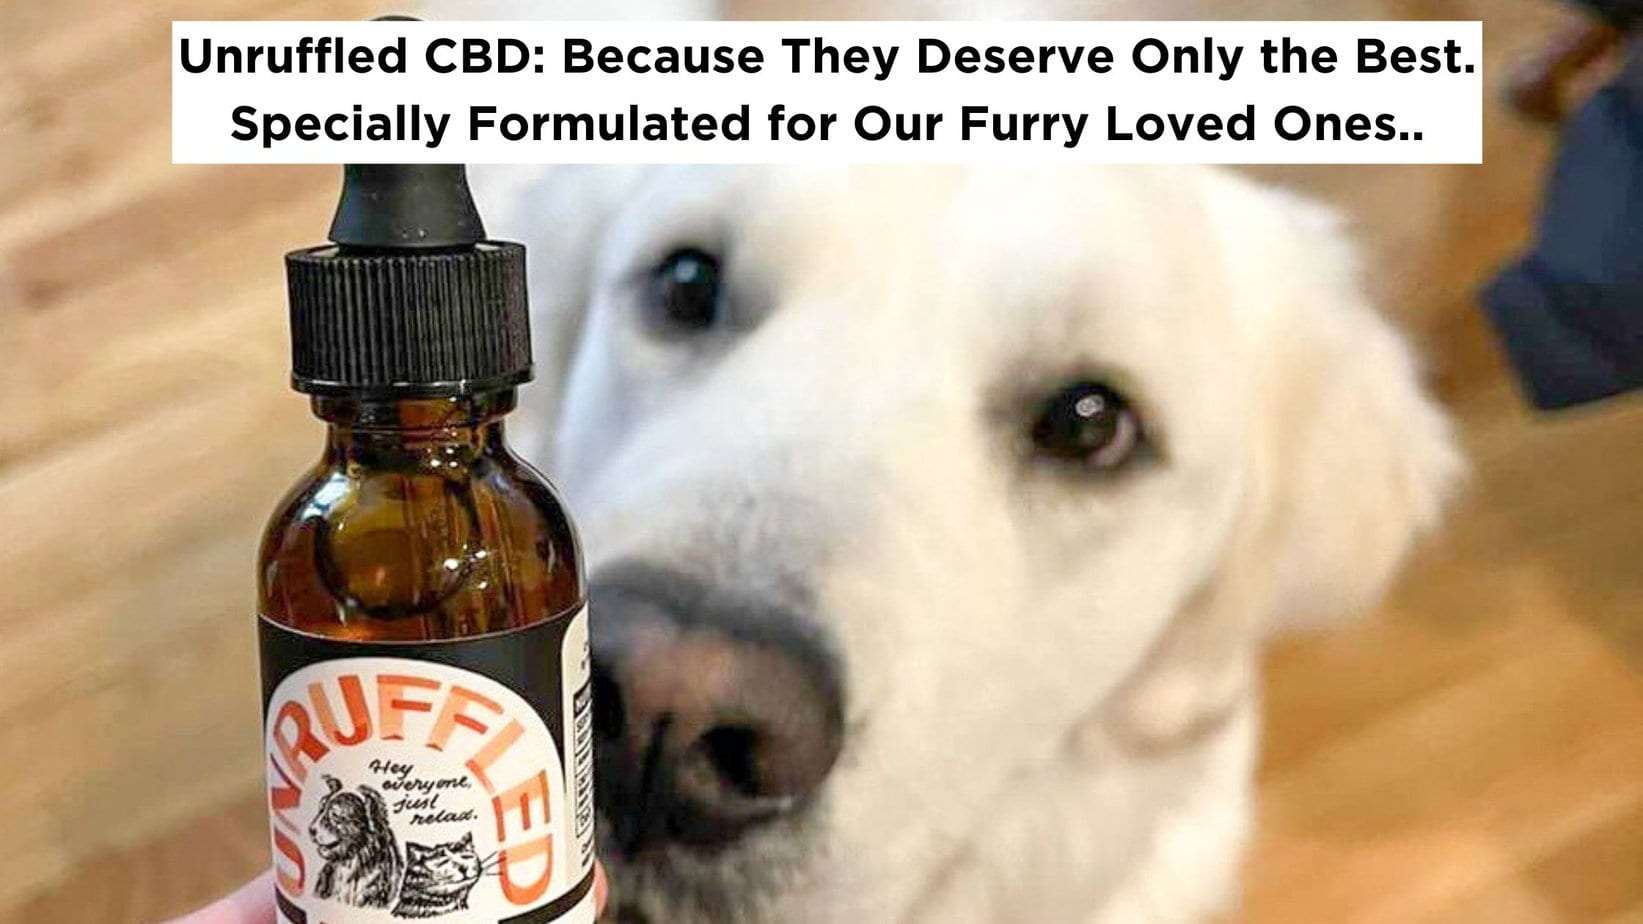 White dog curiously looking at a bottle of Unruffled CBD Oil for pets